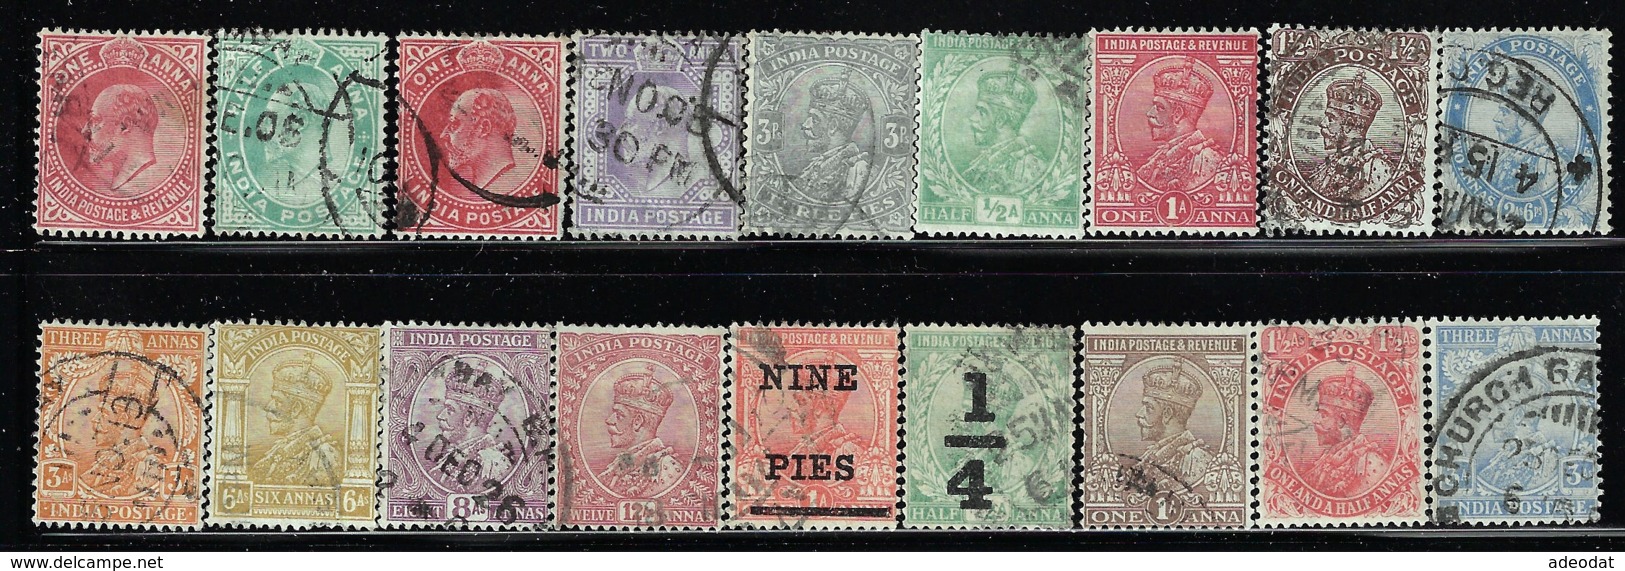 INDIA 1902-1906 SCOTT 61-63,79,89,102,104 CANCELLED CATALOG VALUE US $9.75 - Collections, Lots & Series